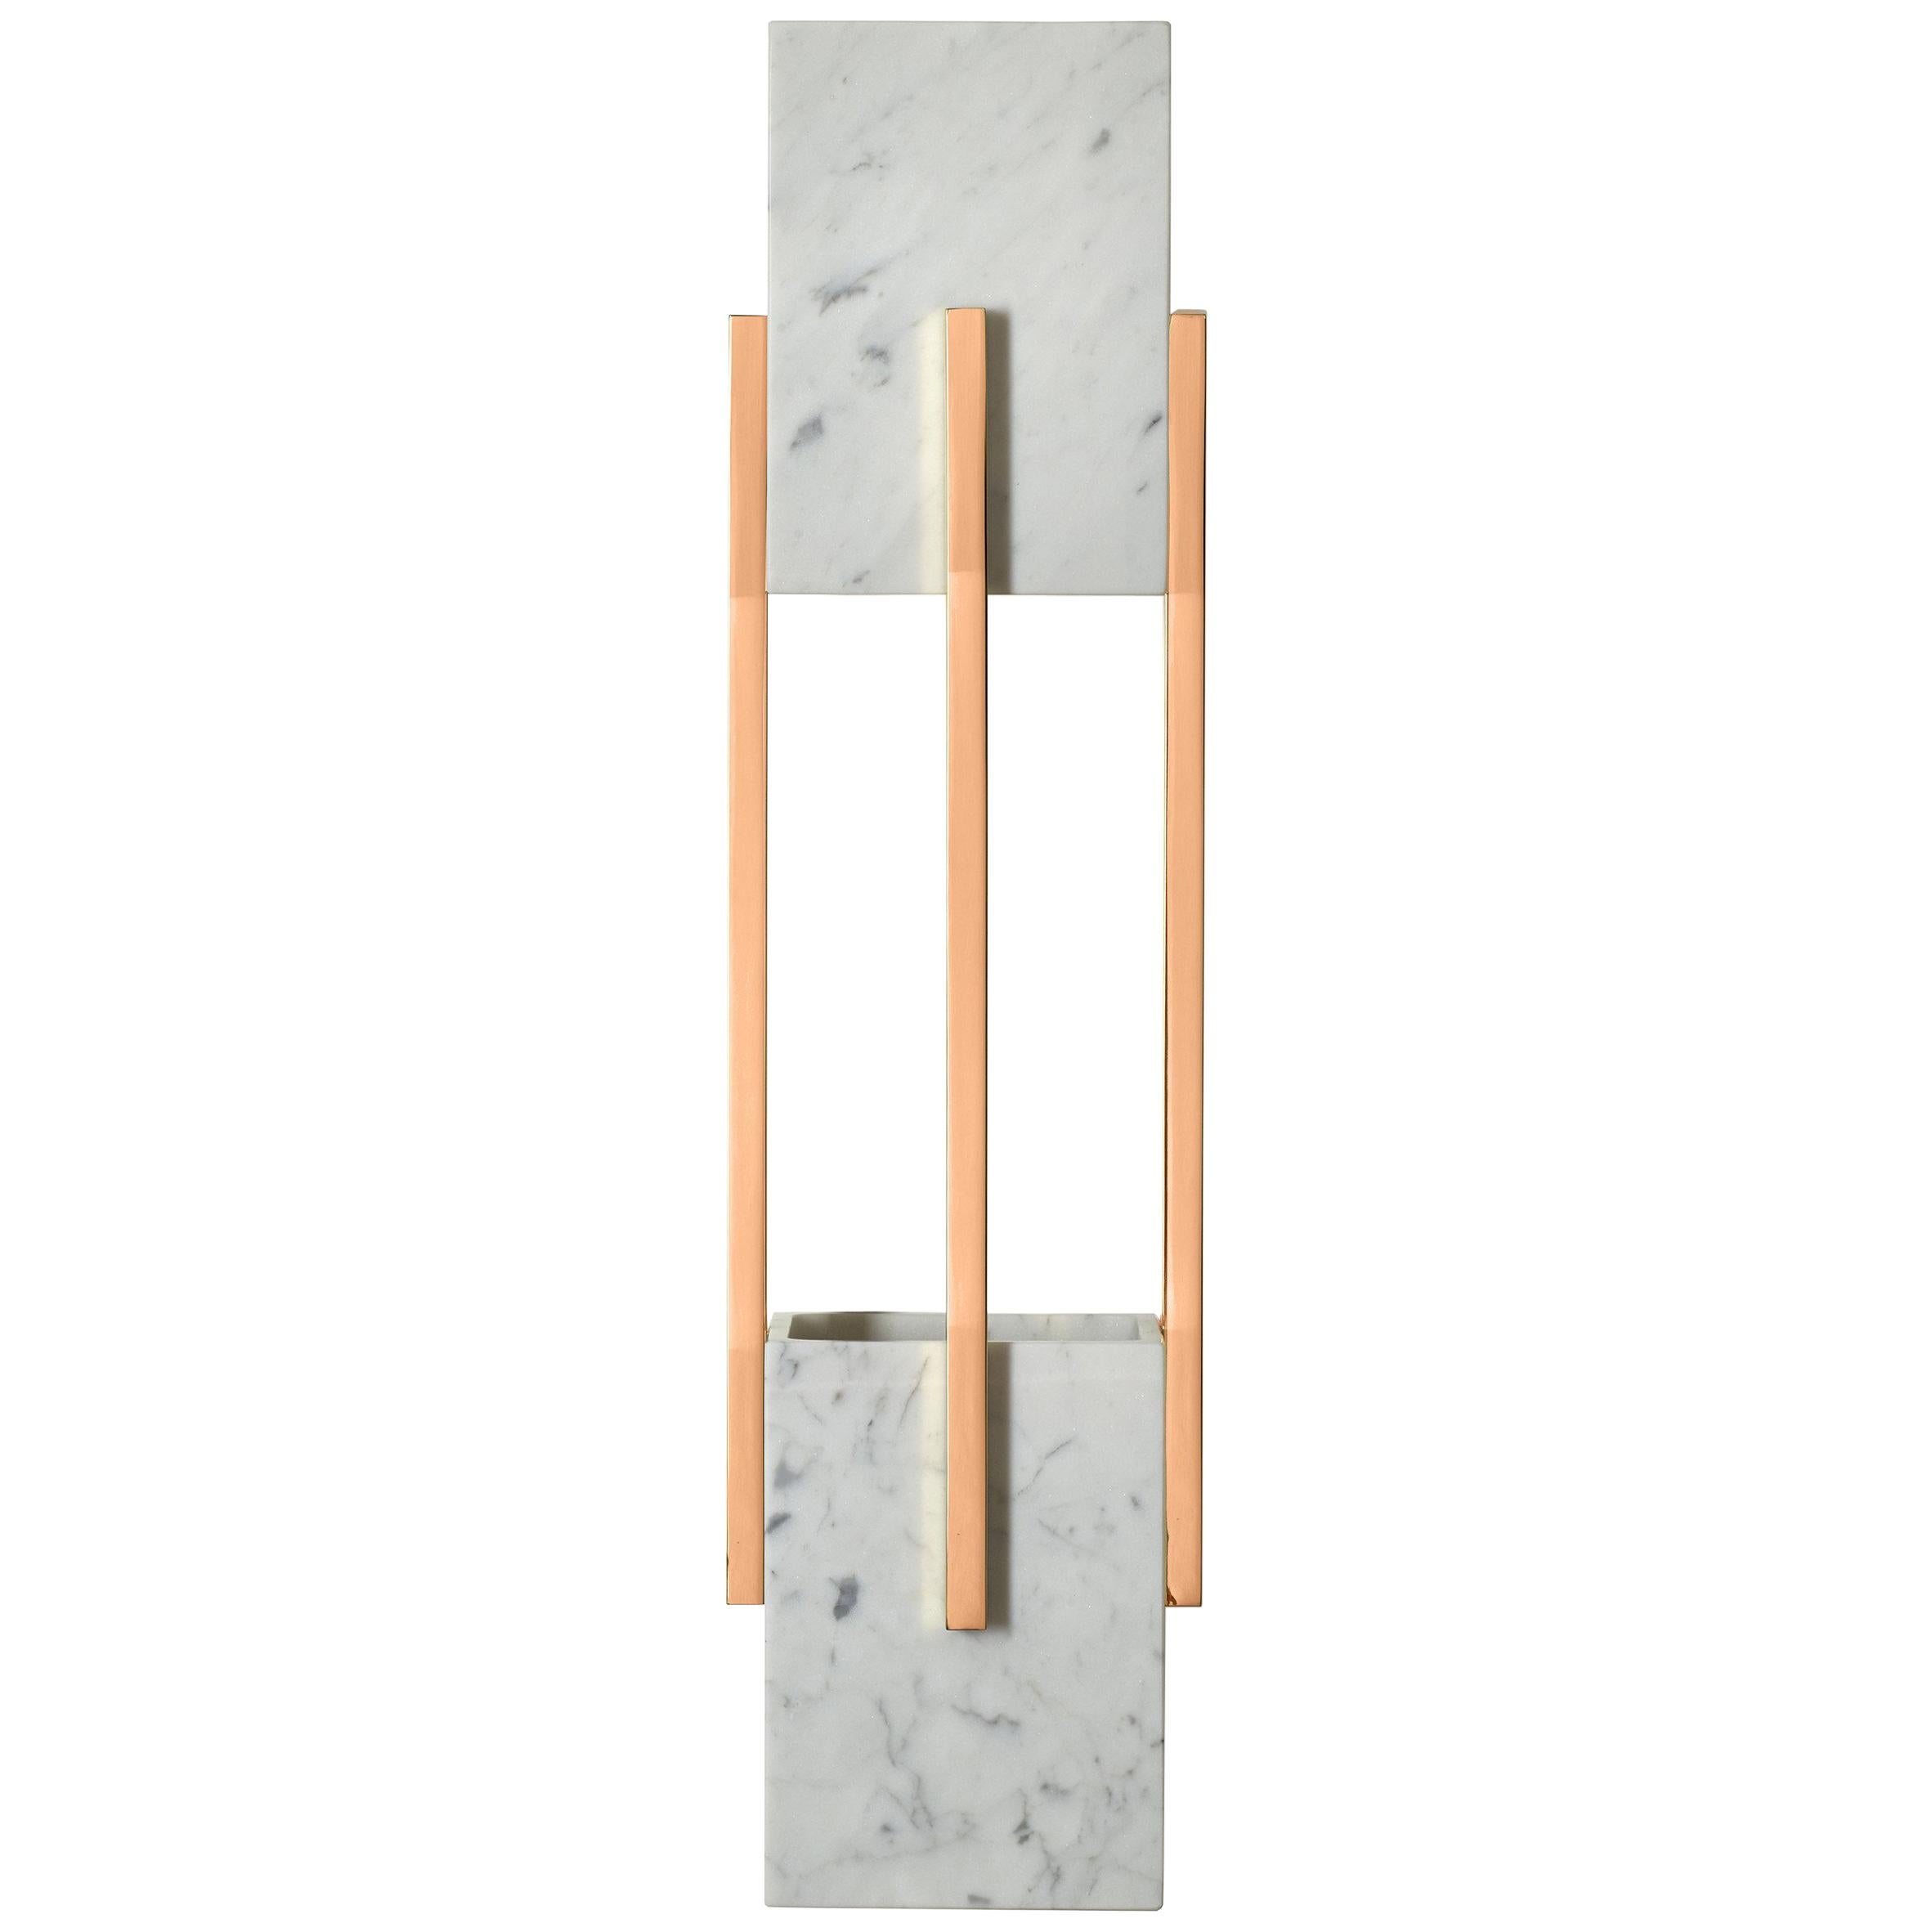 Carrara Marble and Polished Copper Wall Sconce Lamp Handcrafted